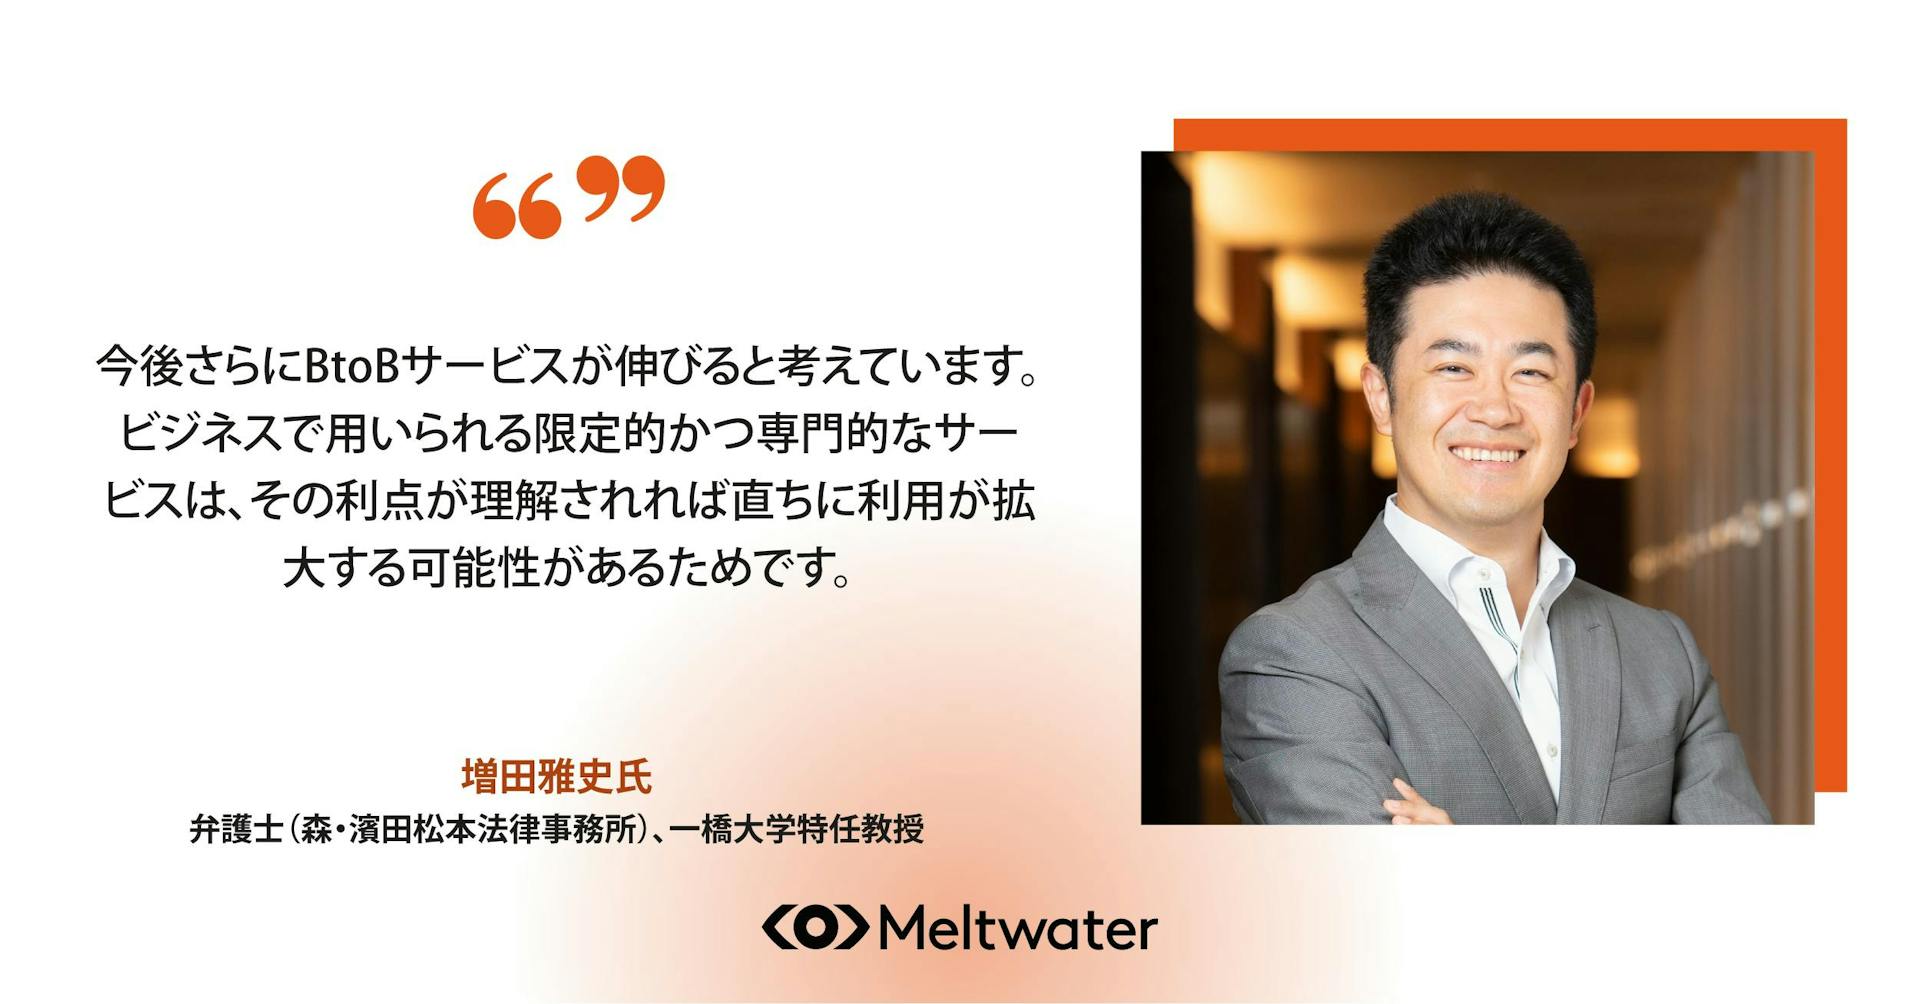 The comment from Masashi Masuda on the Metaverse.